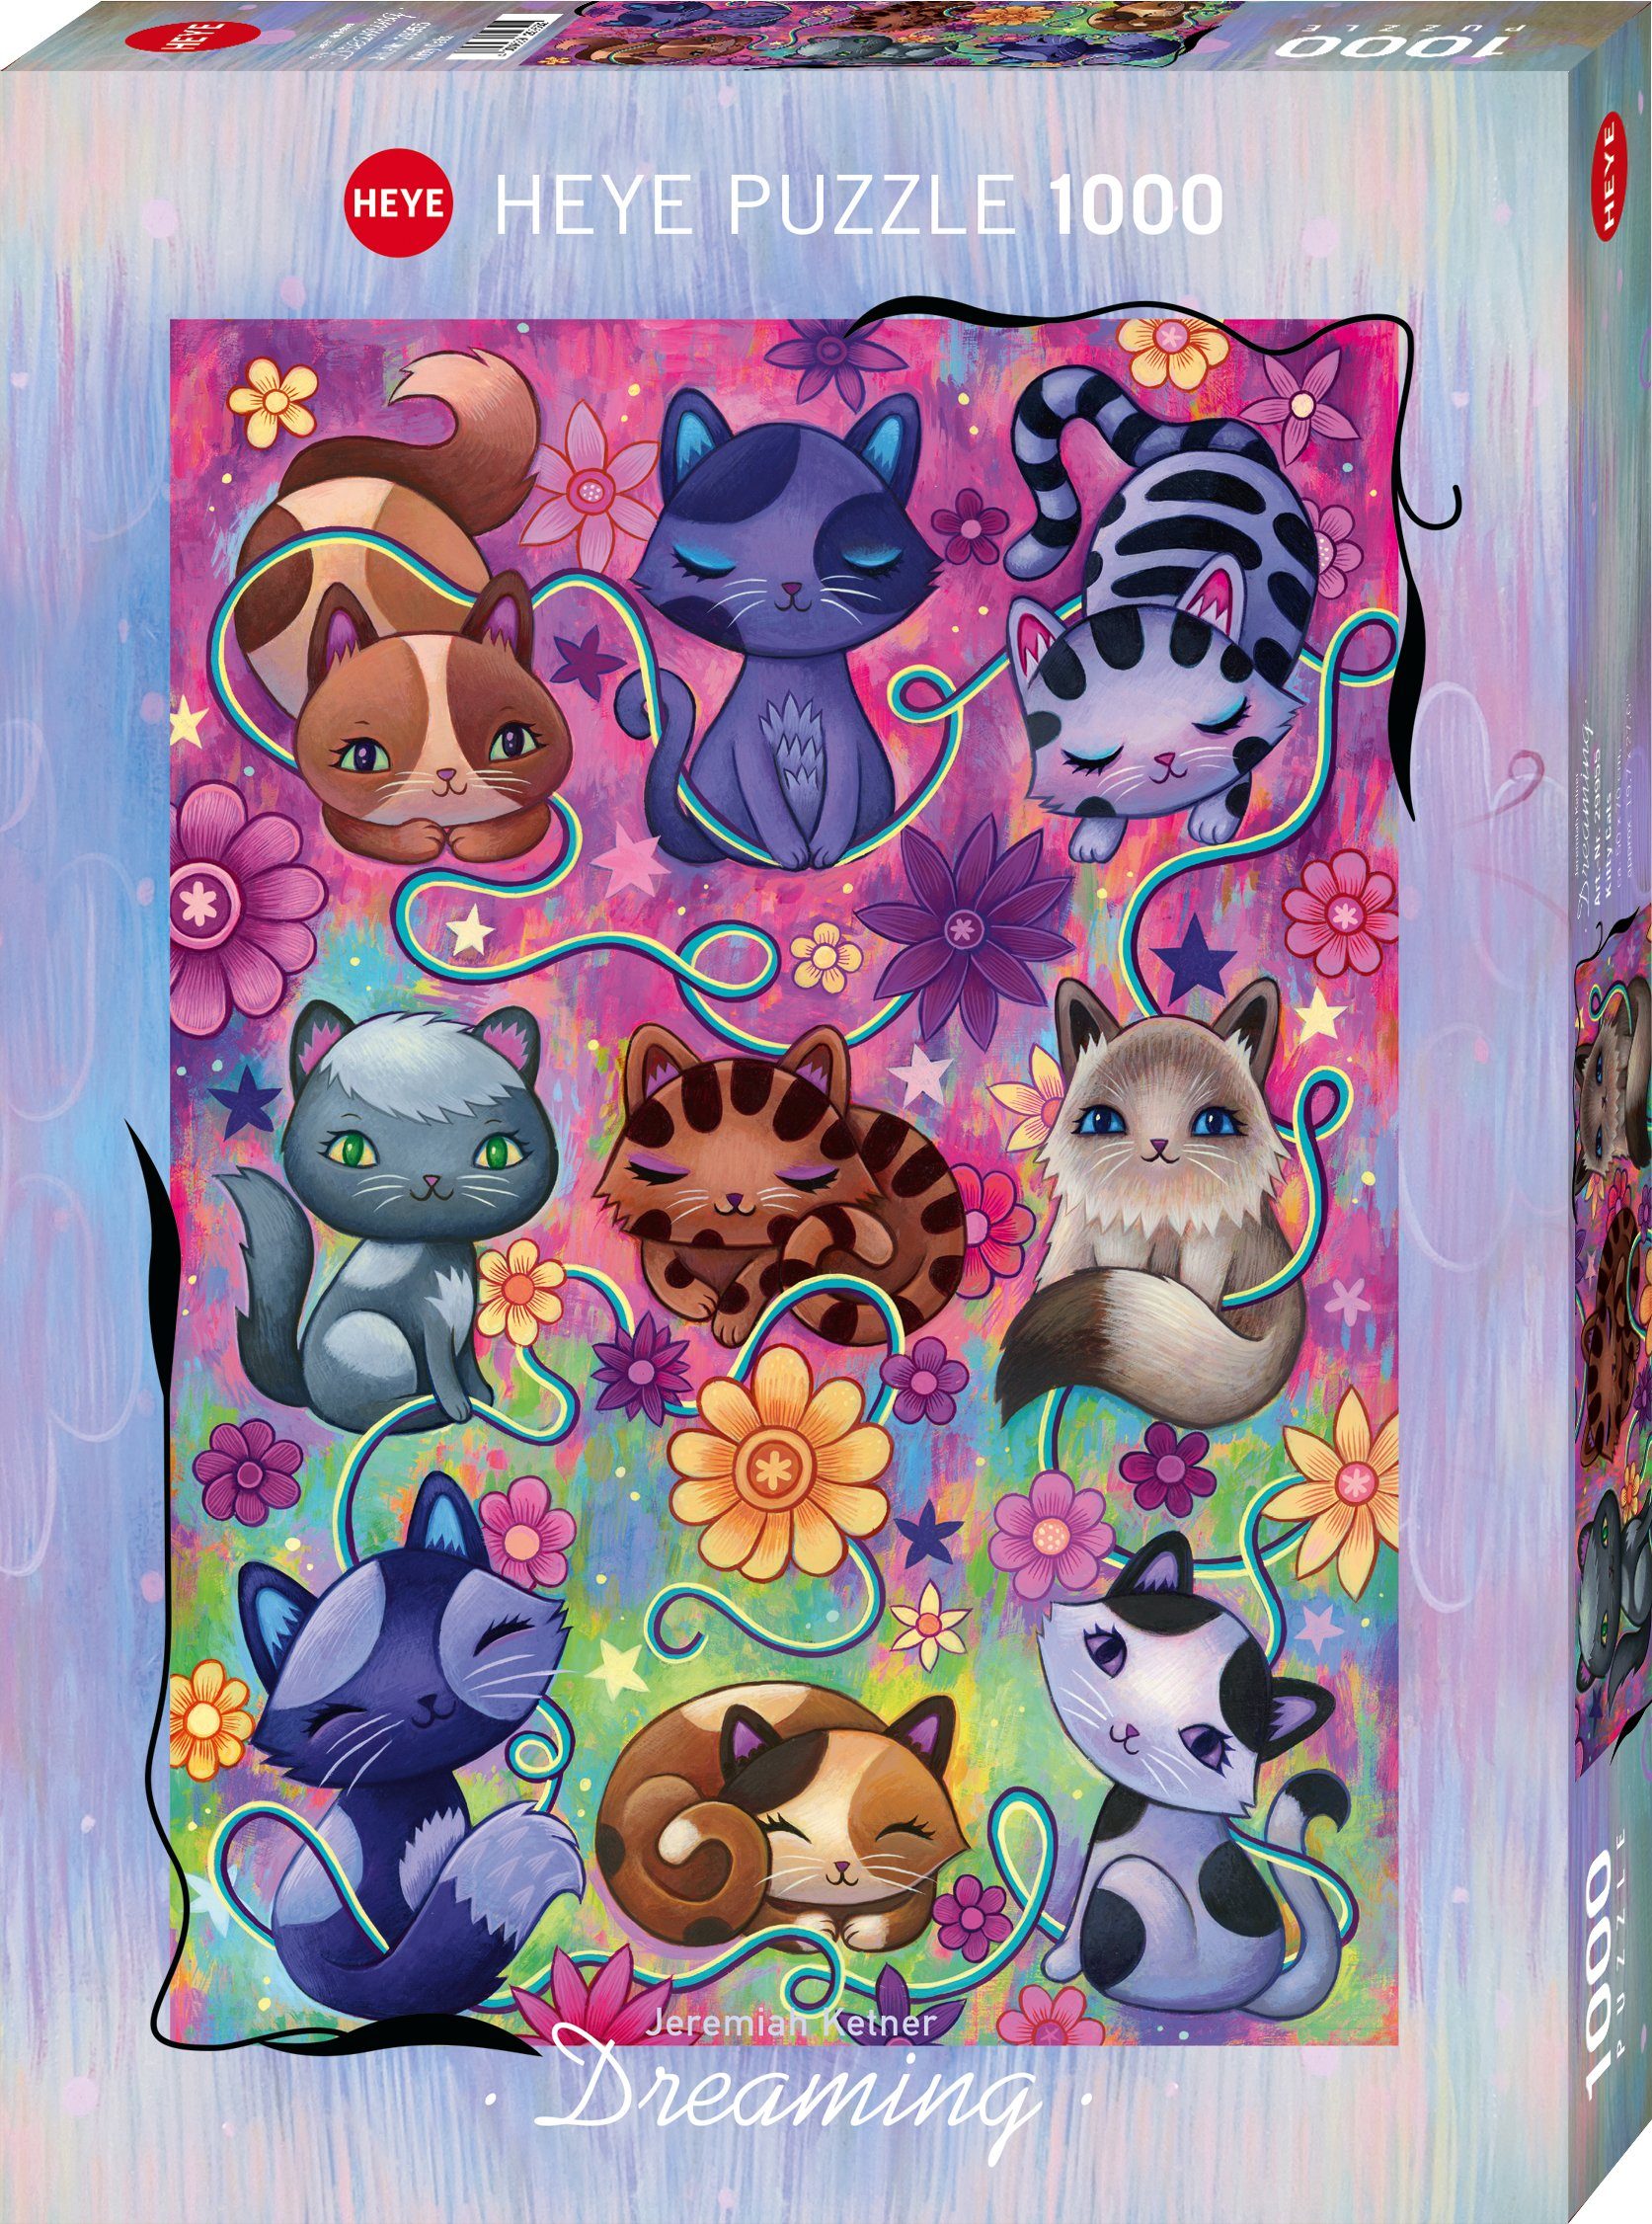 HEYE 1000 Made Puzzleteile, Dreaming, Cats Kitty Puzzle / Germany in